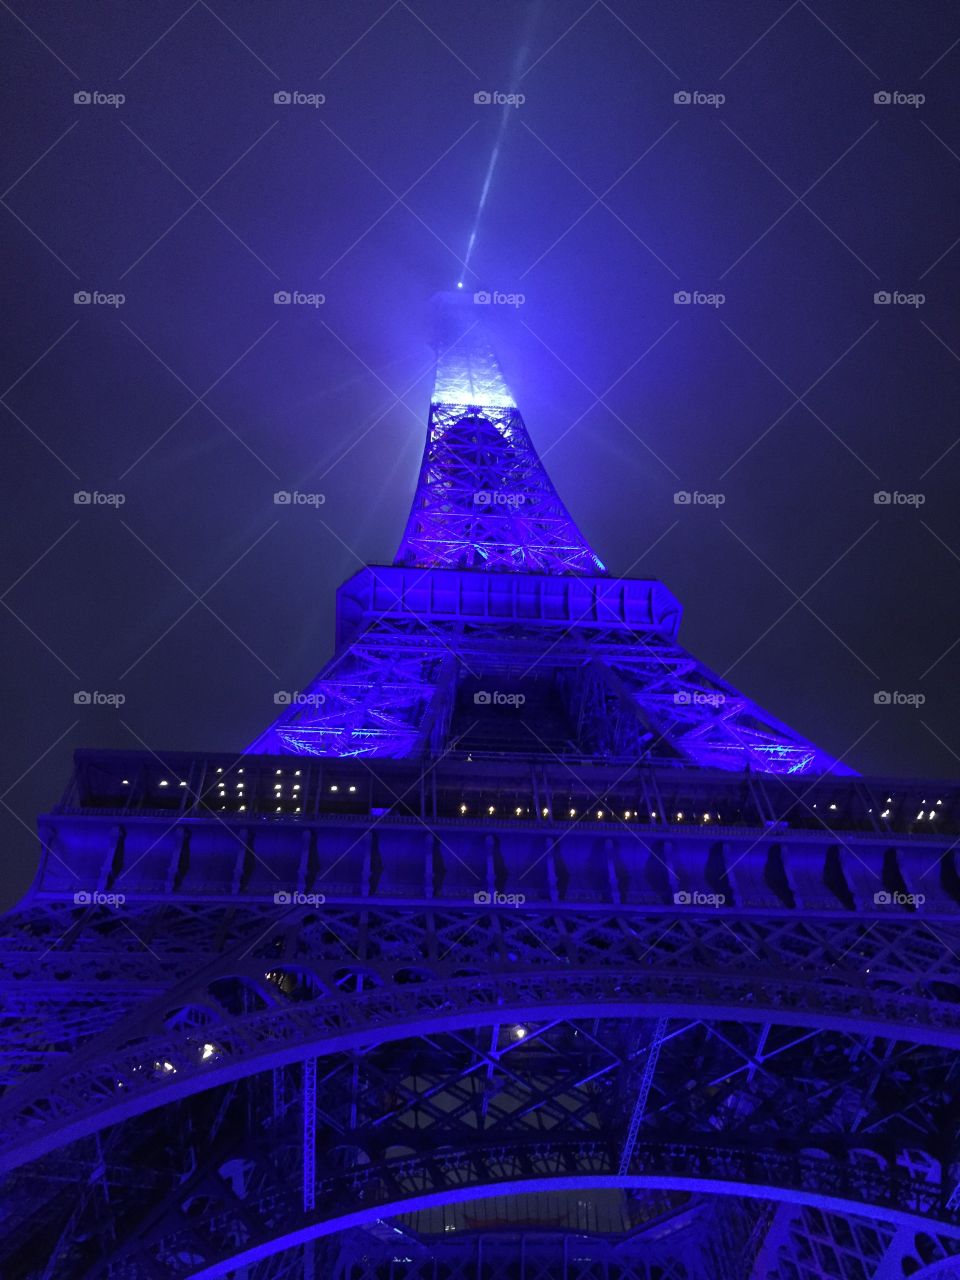 Beneath the Eiffel Tower lit up in blue.